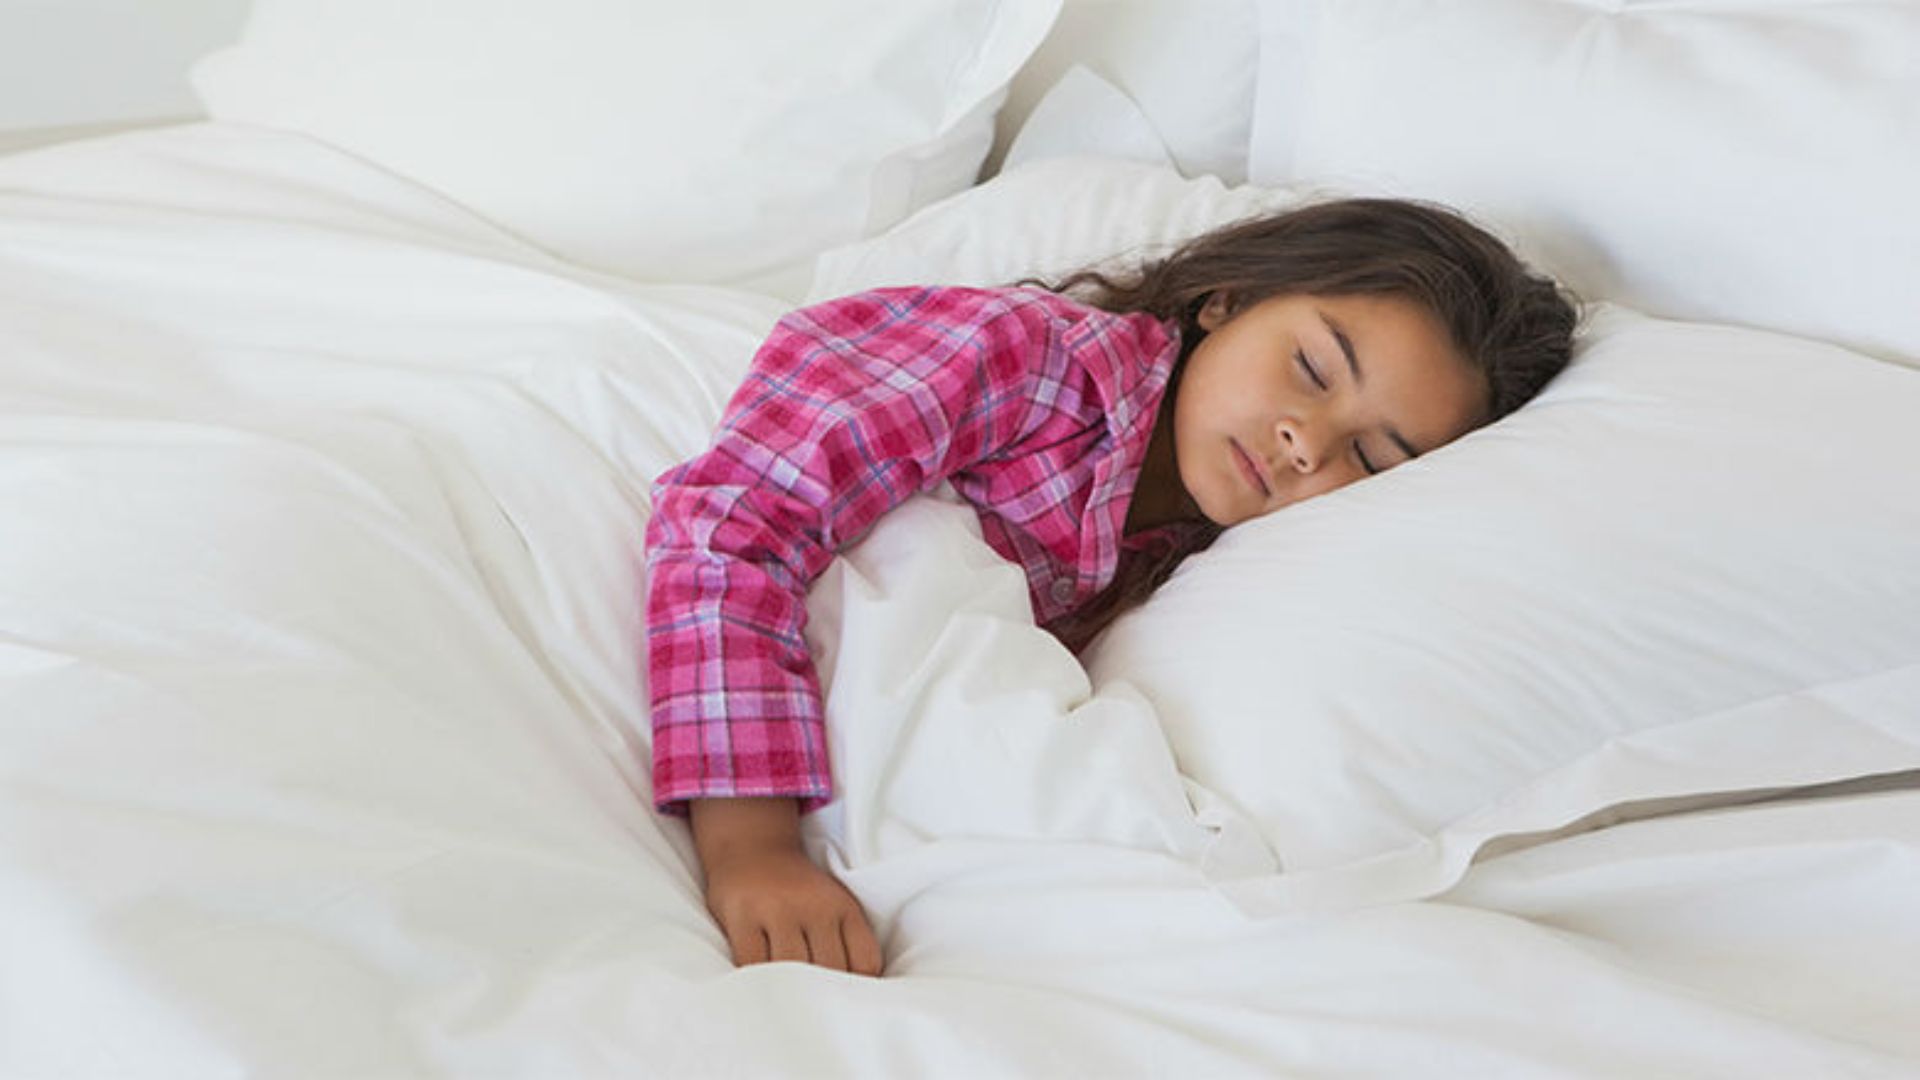 Girl In Pink Outfit Sleeping On White Bed